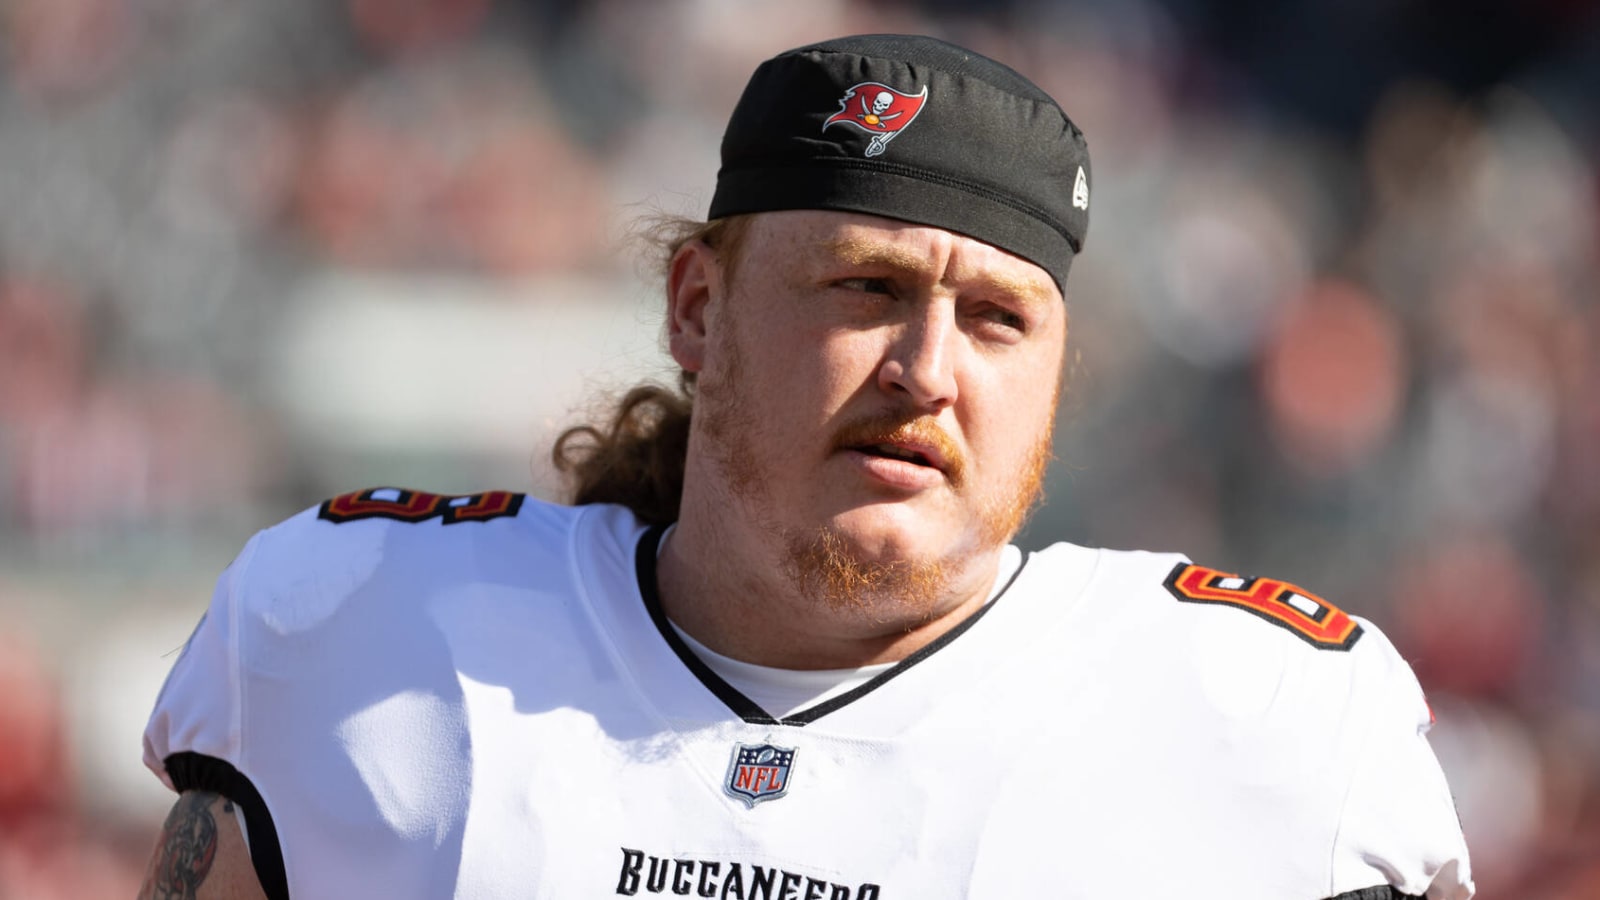 Buccaneers former Pro Bowl center to retire